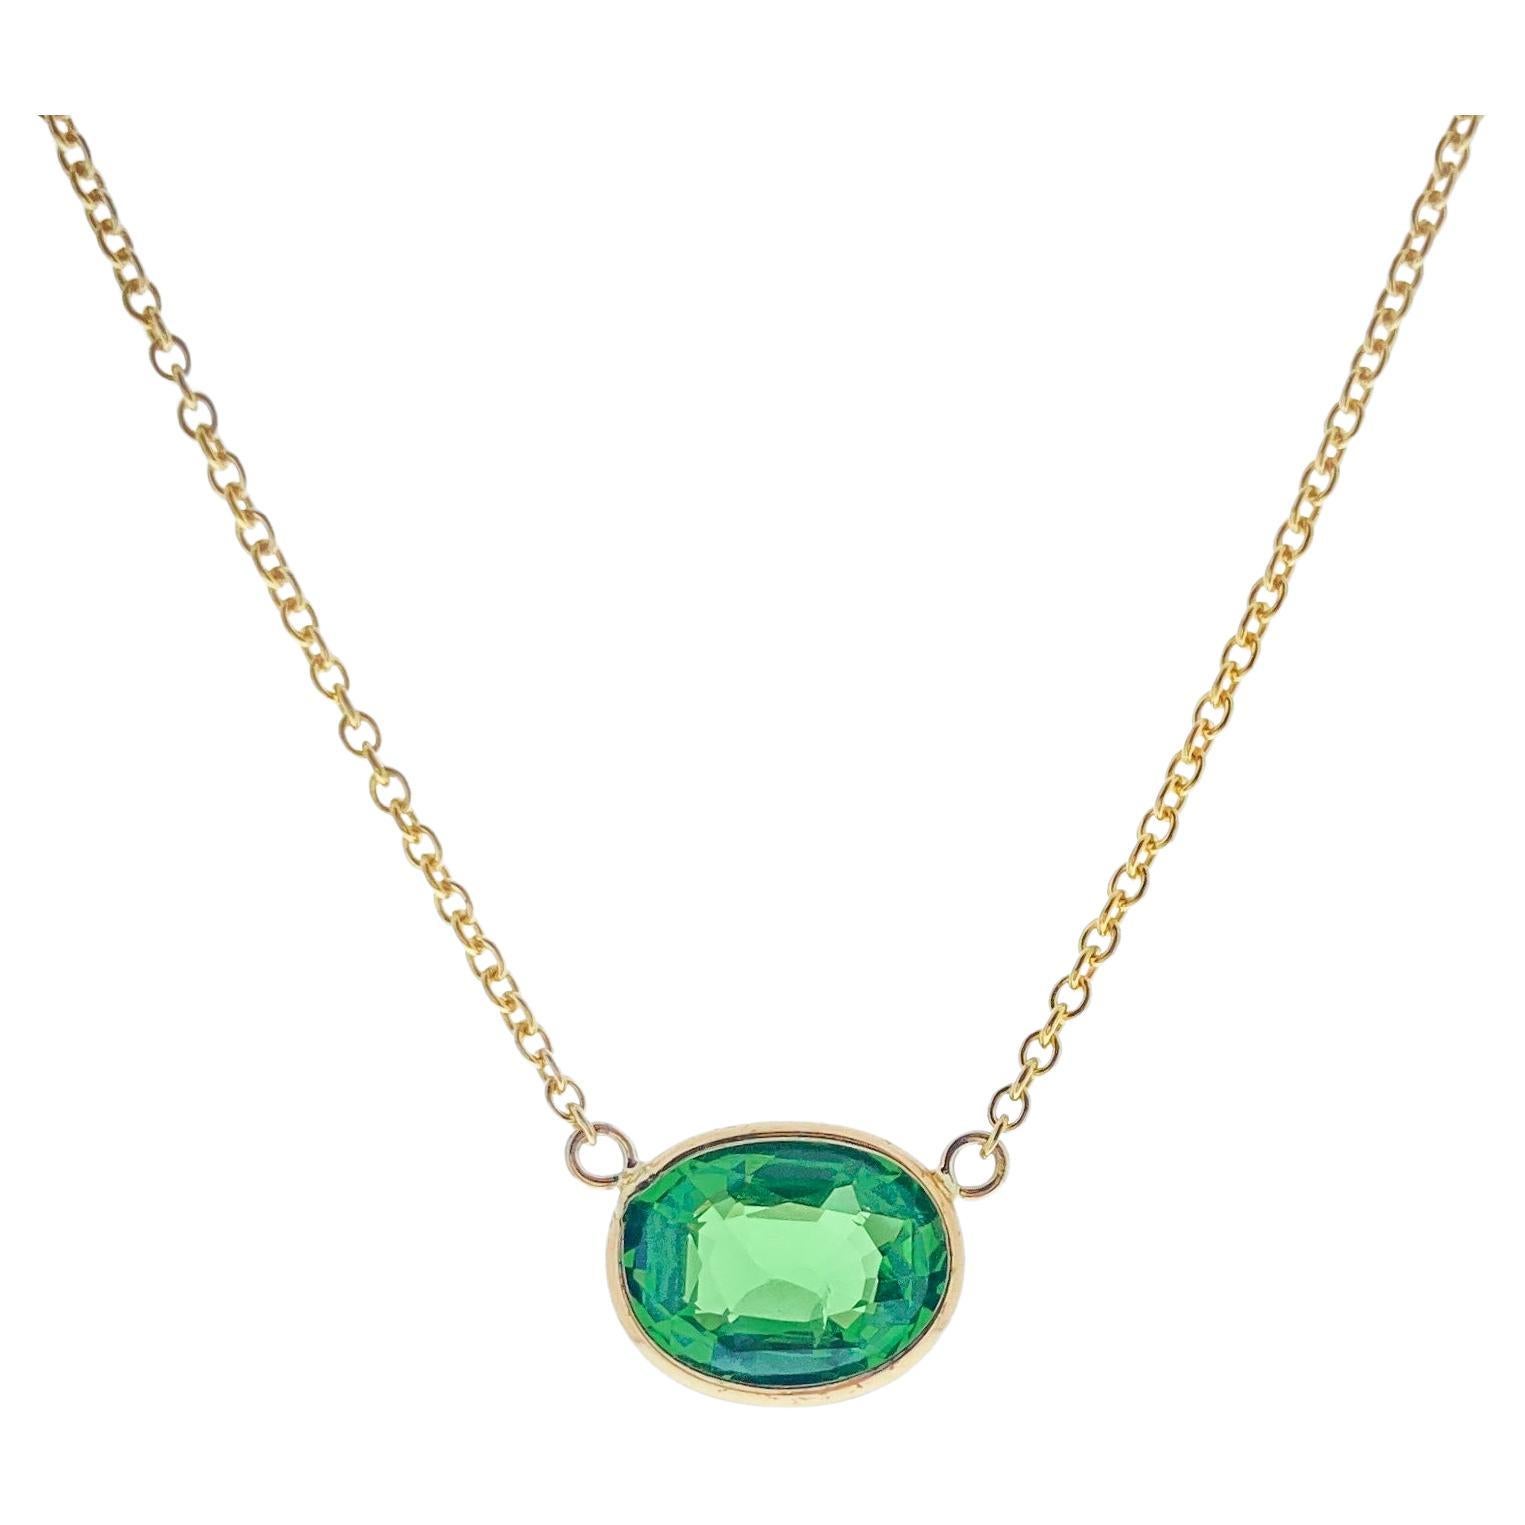 2.02 Carat Green Tsavorite Oval Cut Fashion Necklaces In 14K Yellow Gold  For Sale